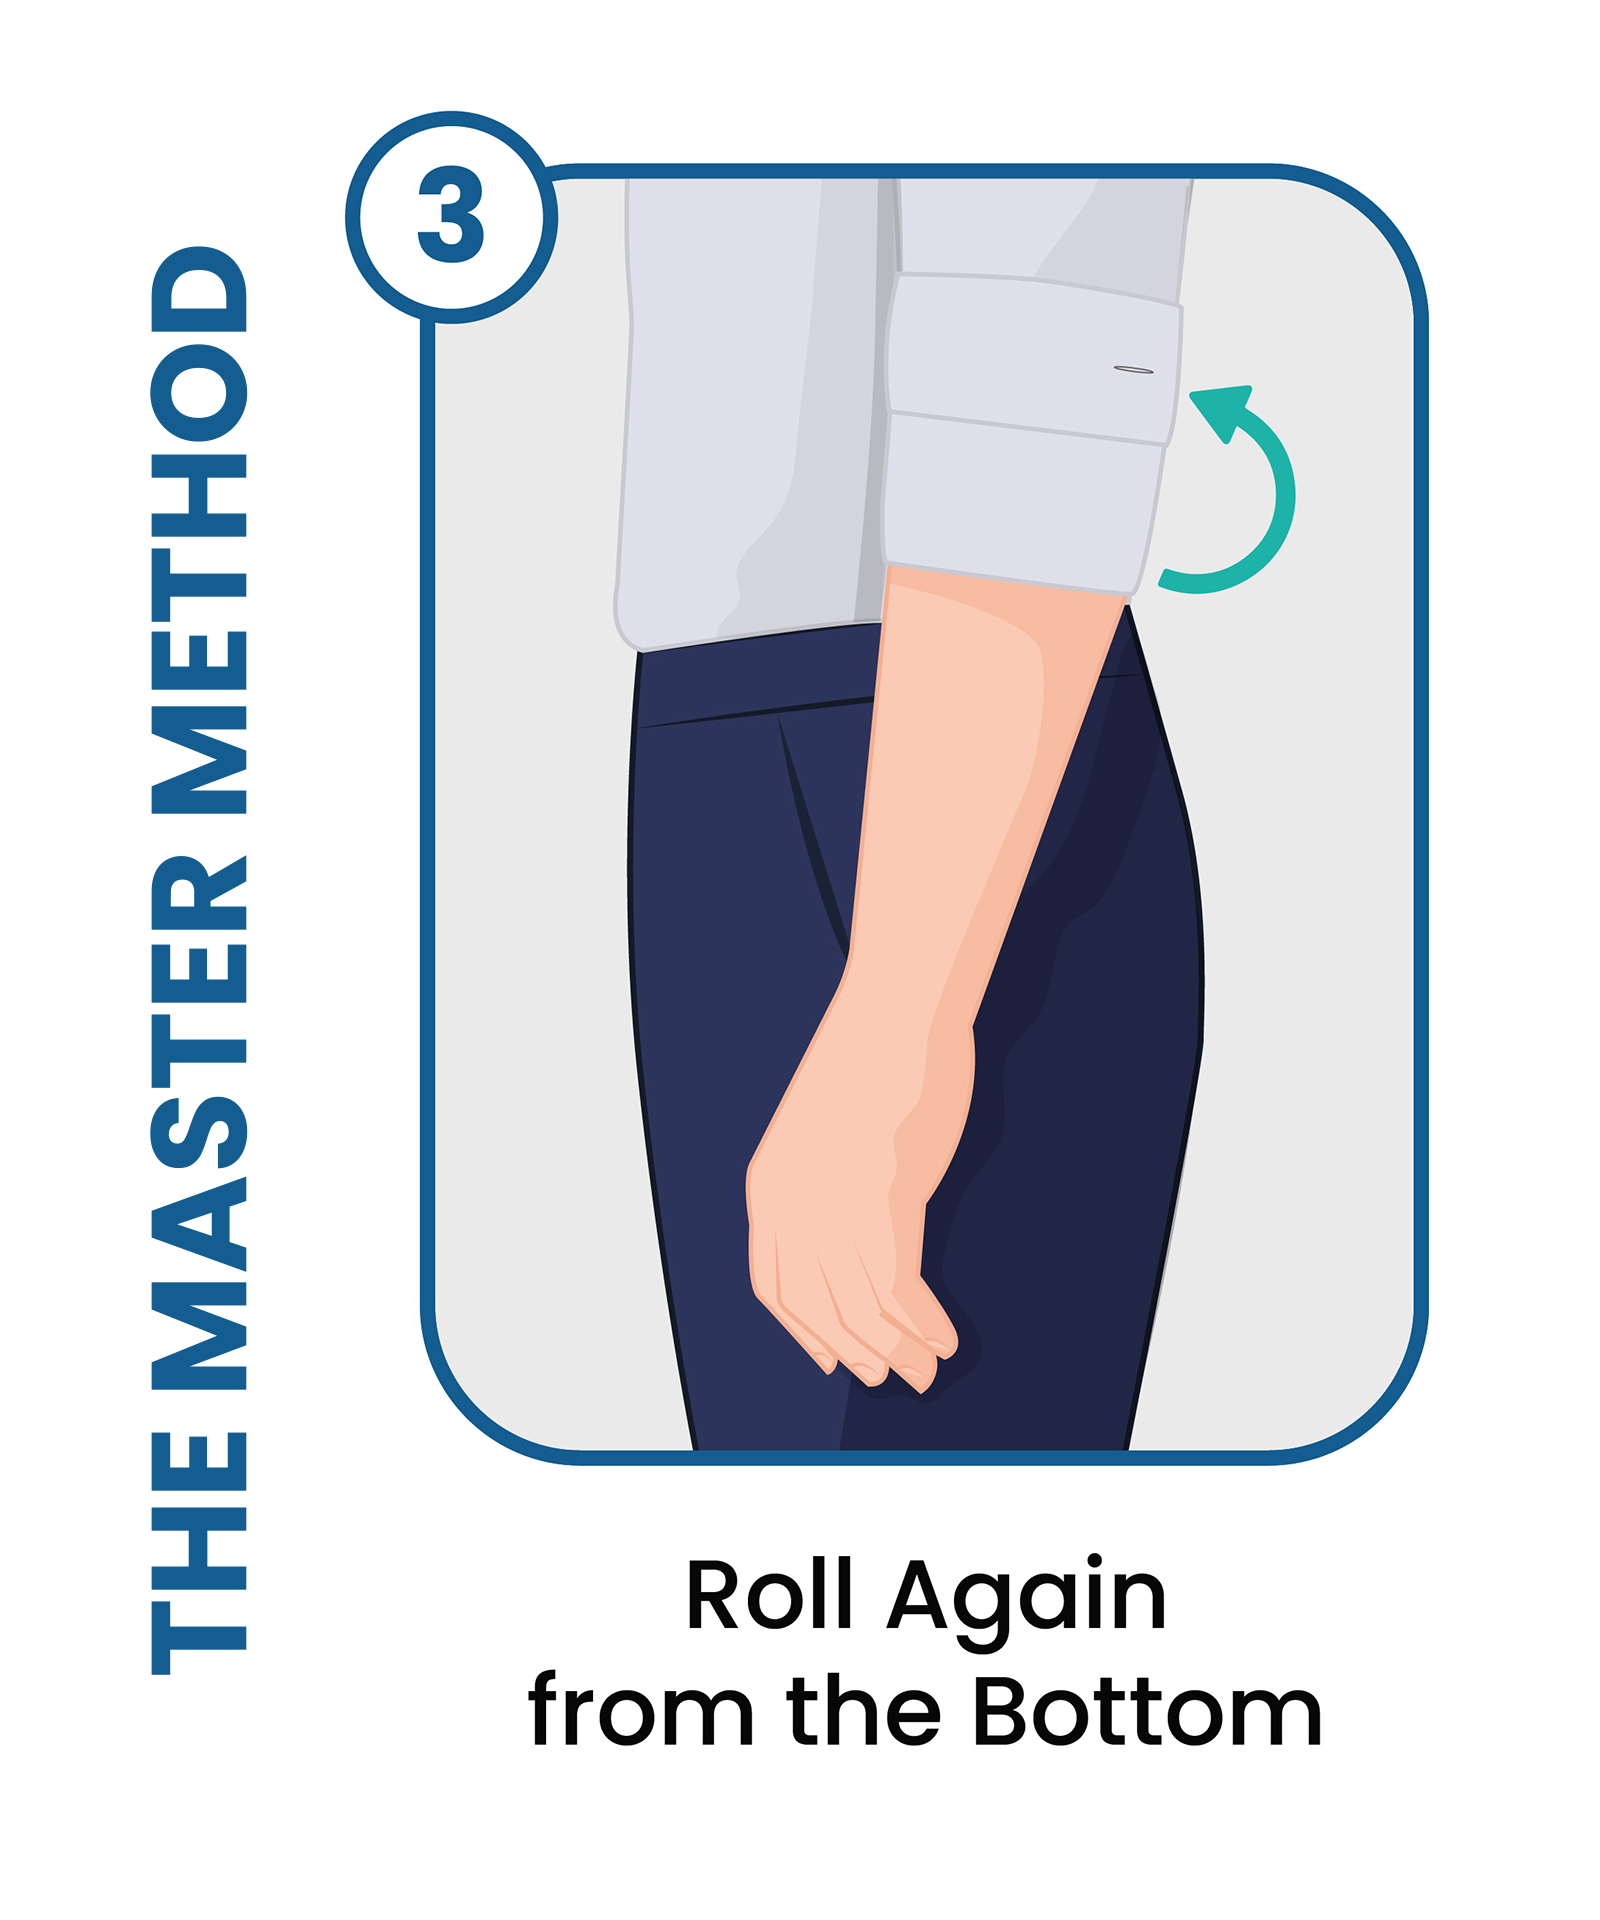 the master method: step 3 is to roll again from the bottom 